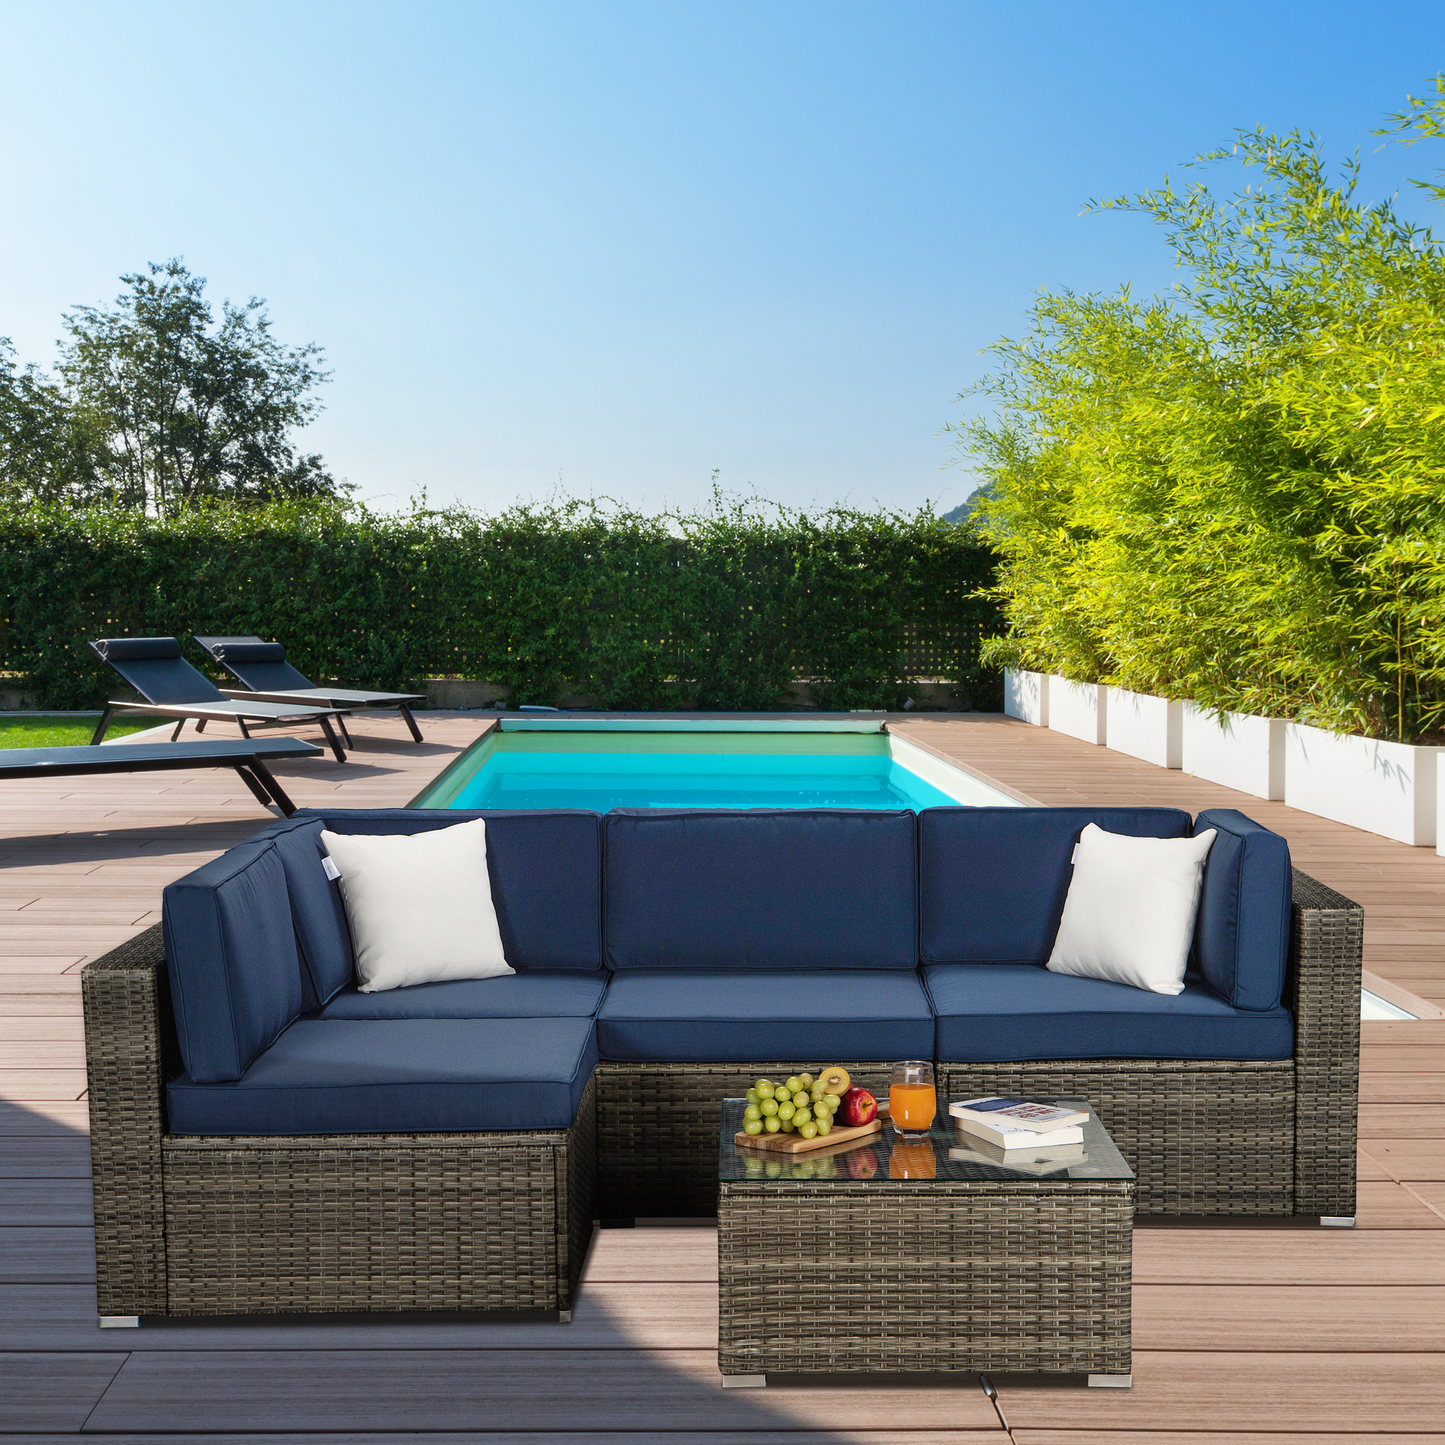 Outdoor Garden Patio Furniture 5-Piece Dark Gray PE Rattan Wicker Sectional Navy Cushioned Sofa Sets with 2 Begie Pillows